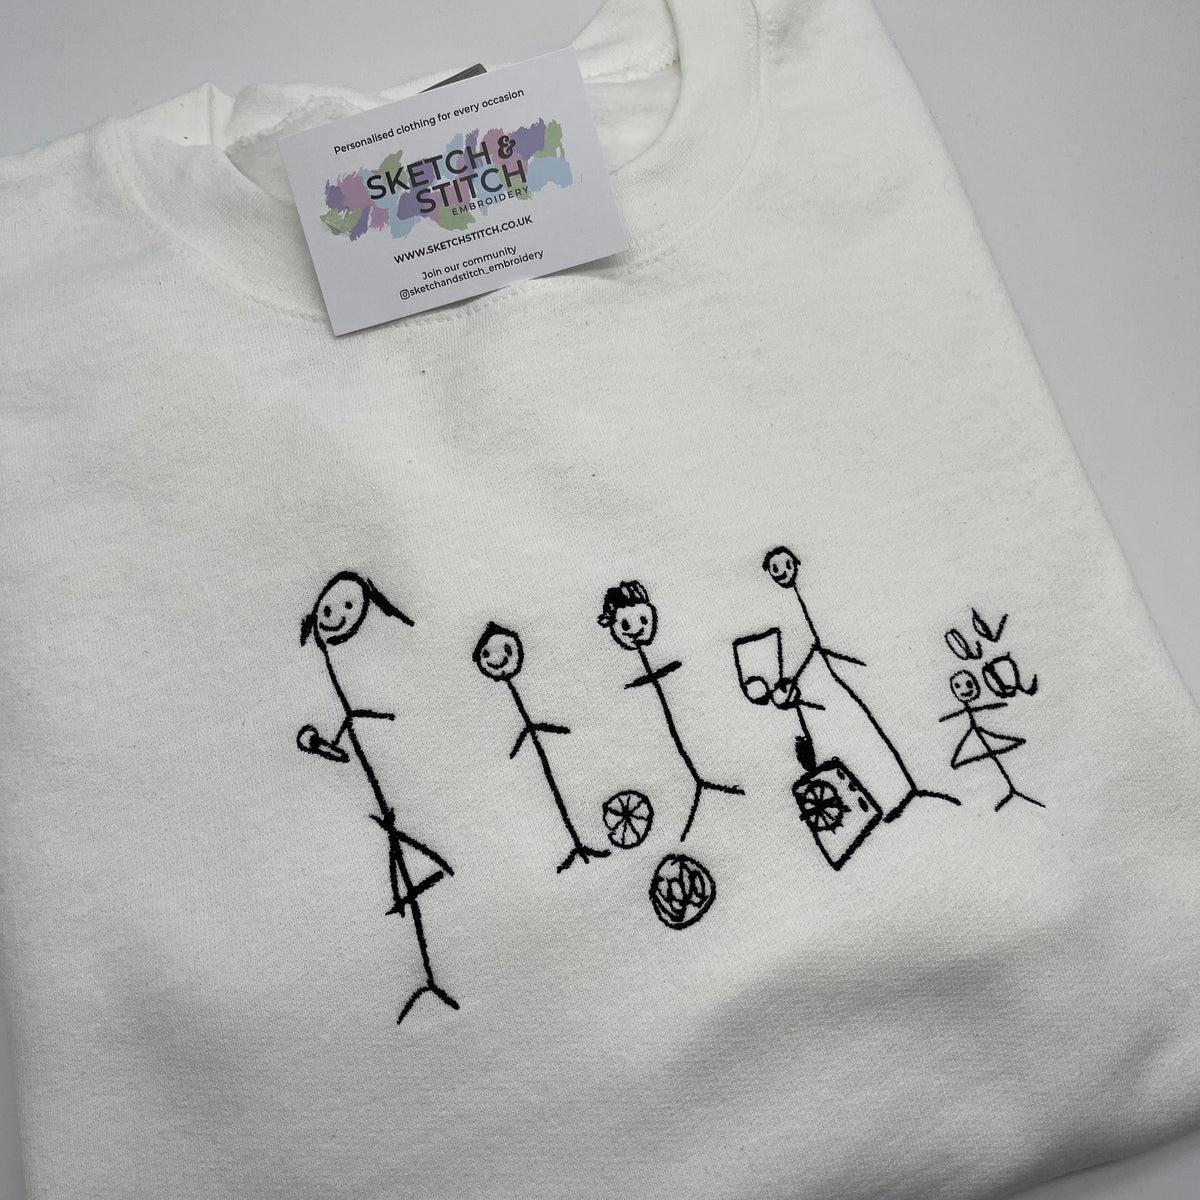 Father's Day Men's Sweatshirt with Personalized Kid's Drawing